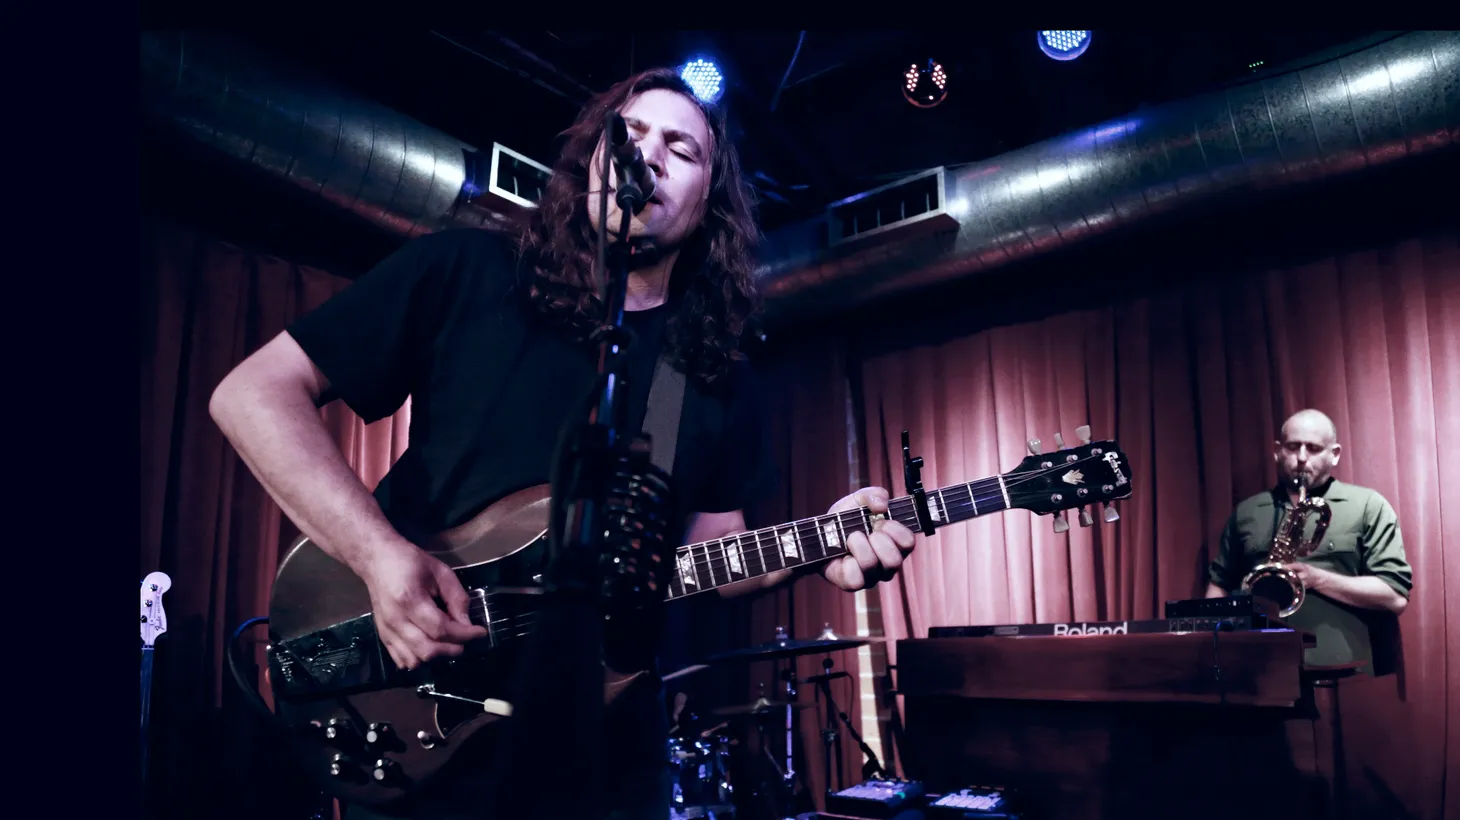 To say 2014's Lost in the Dream was a breakthrough album for Philly rockers The War on Drugs would be a vast understatement. We've been eagerly anticipating their followup, A Deeper Understanding, and they did not disappoint.